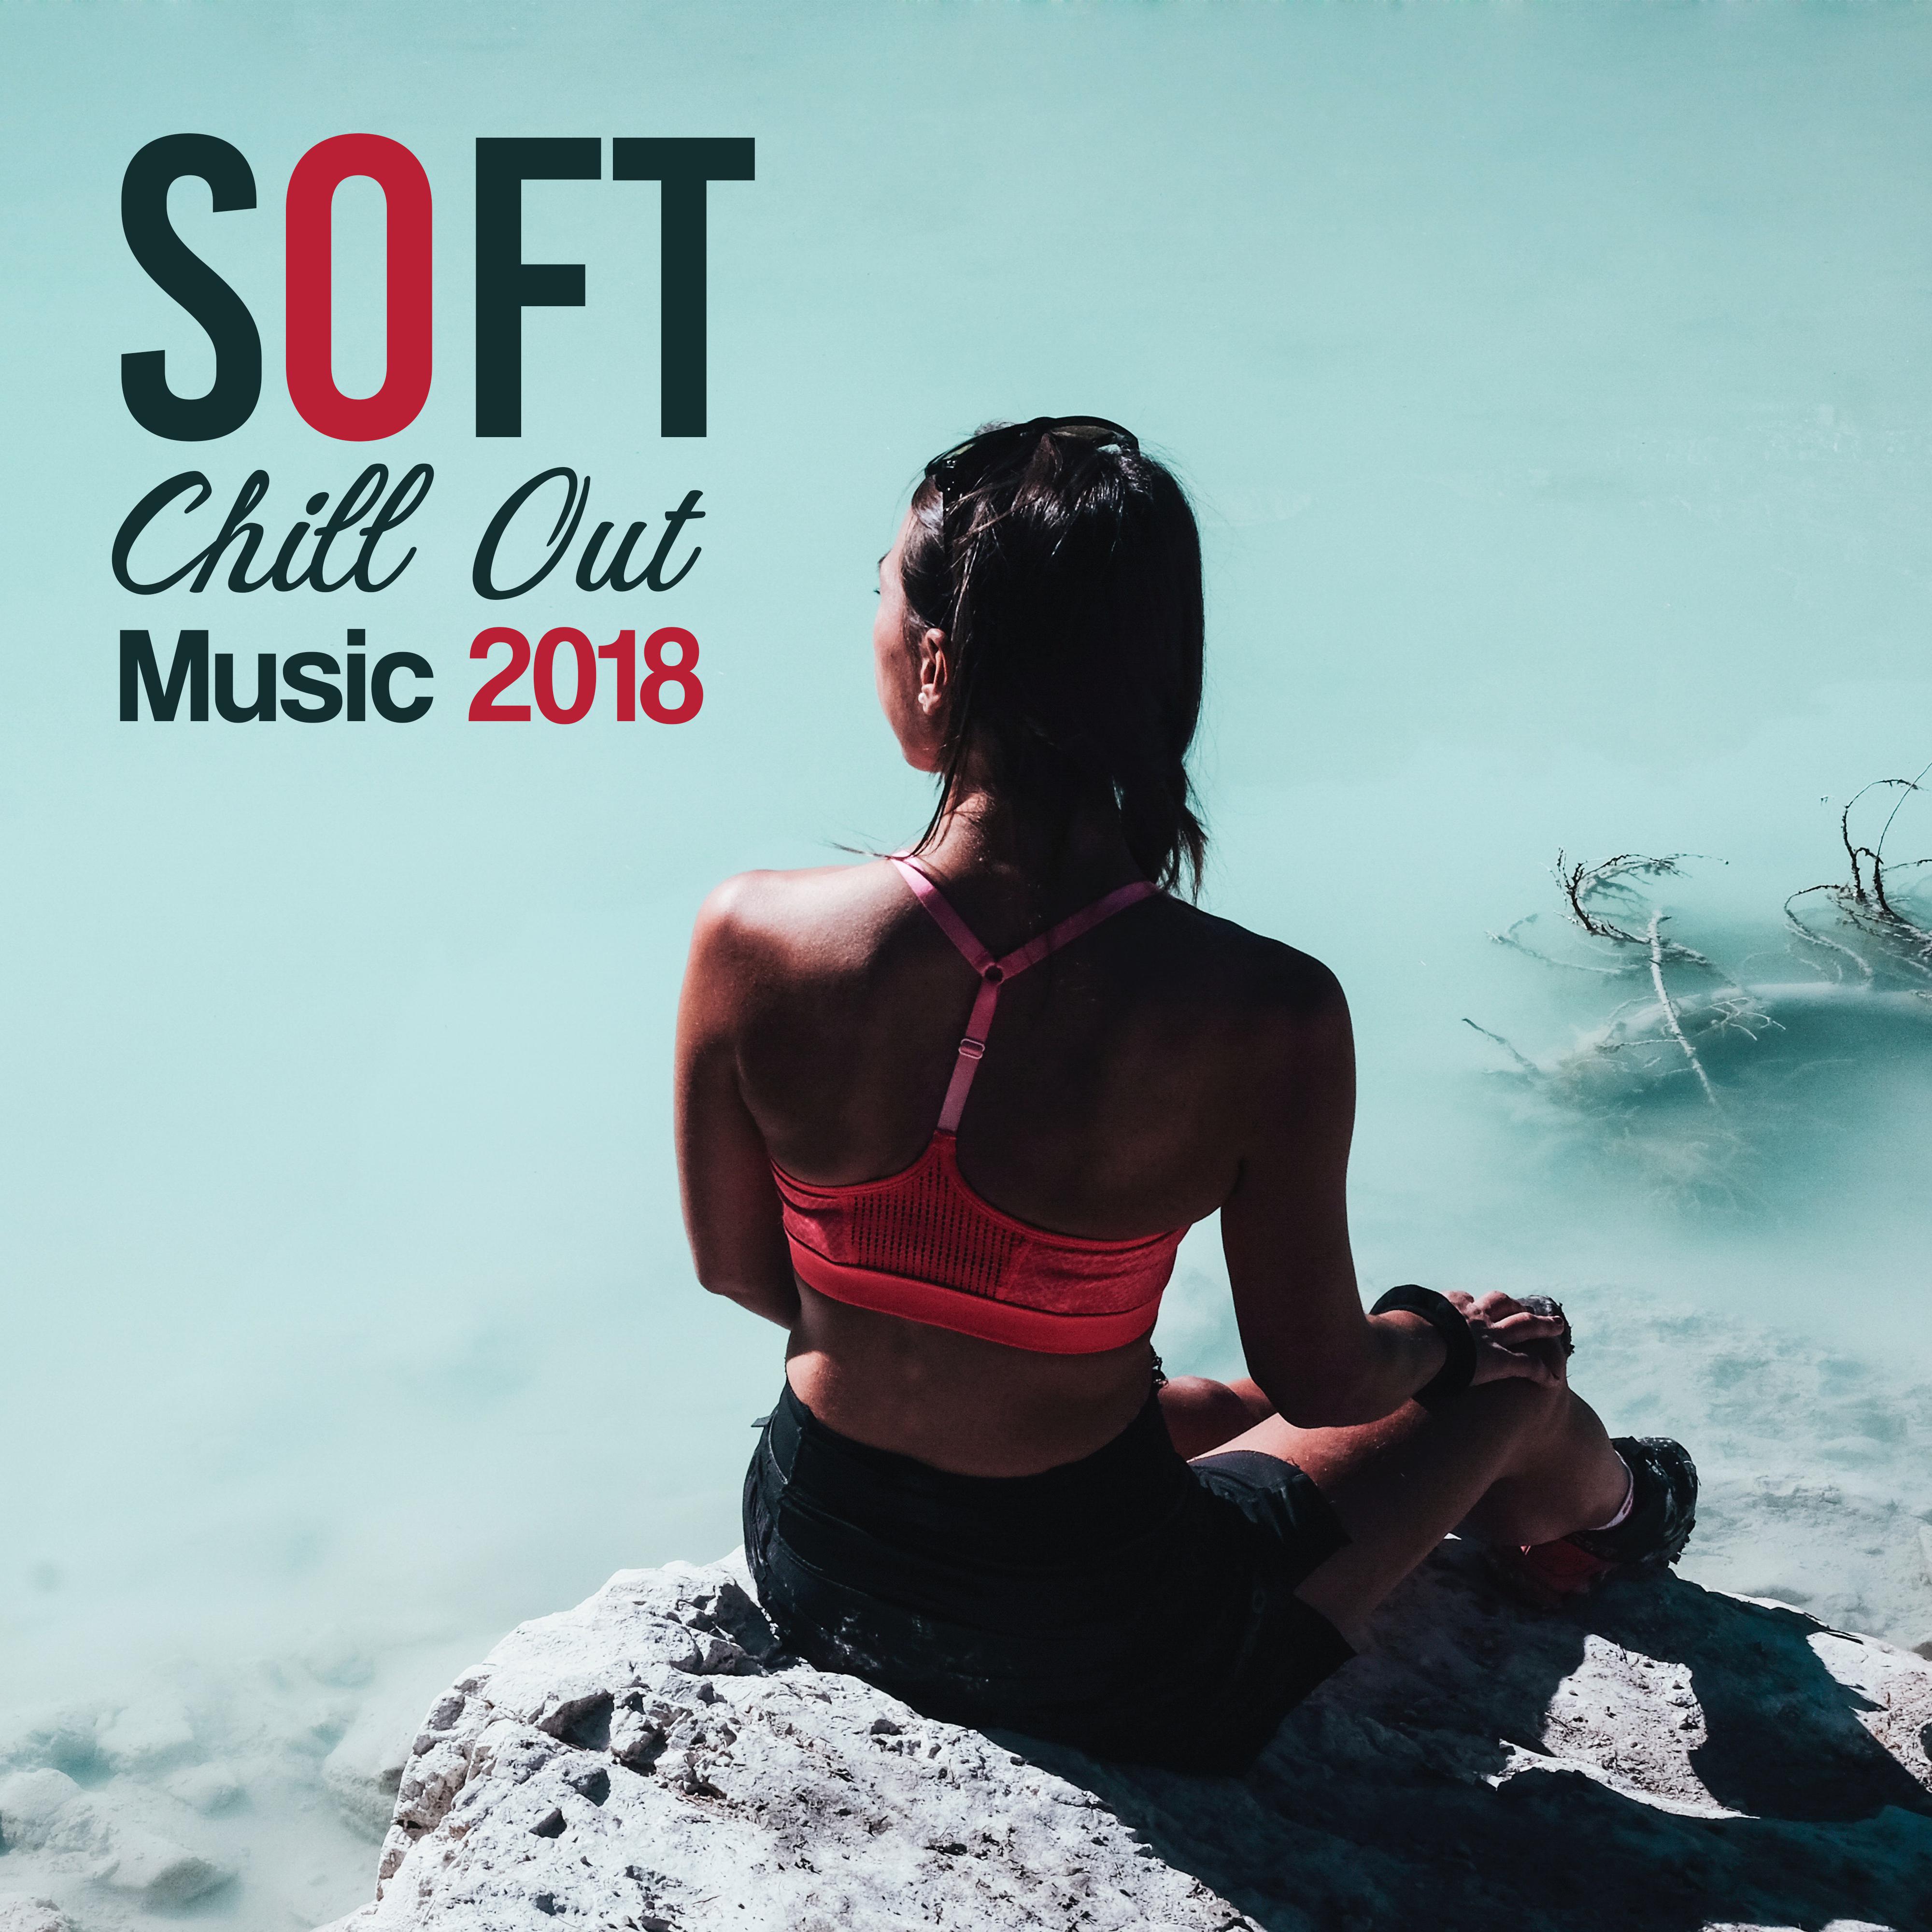 Soft Chill Out Music 2018